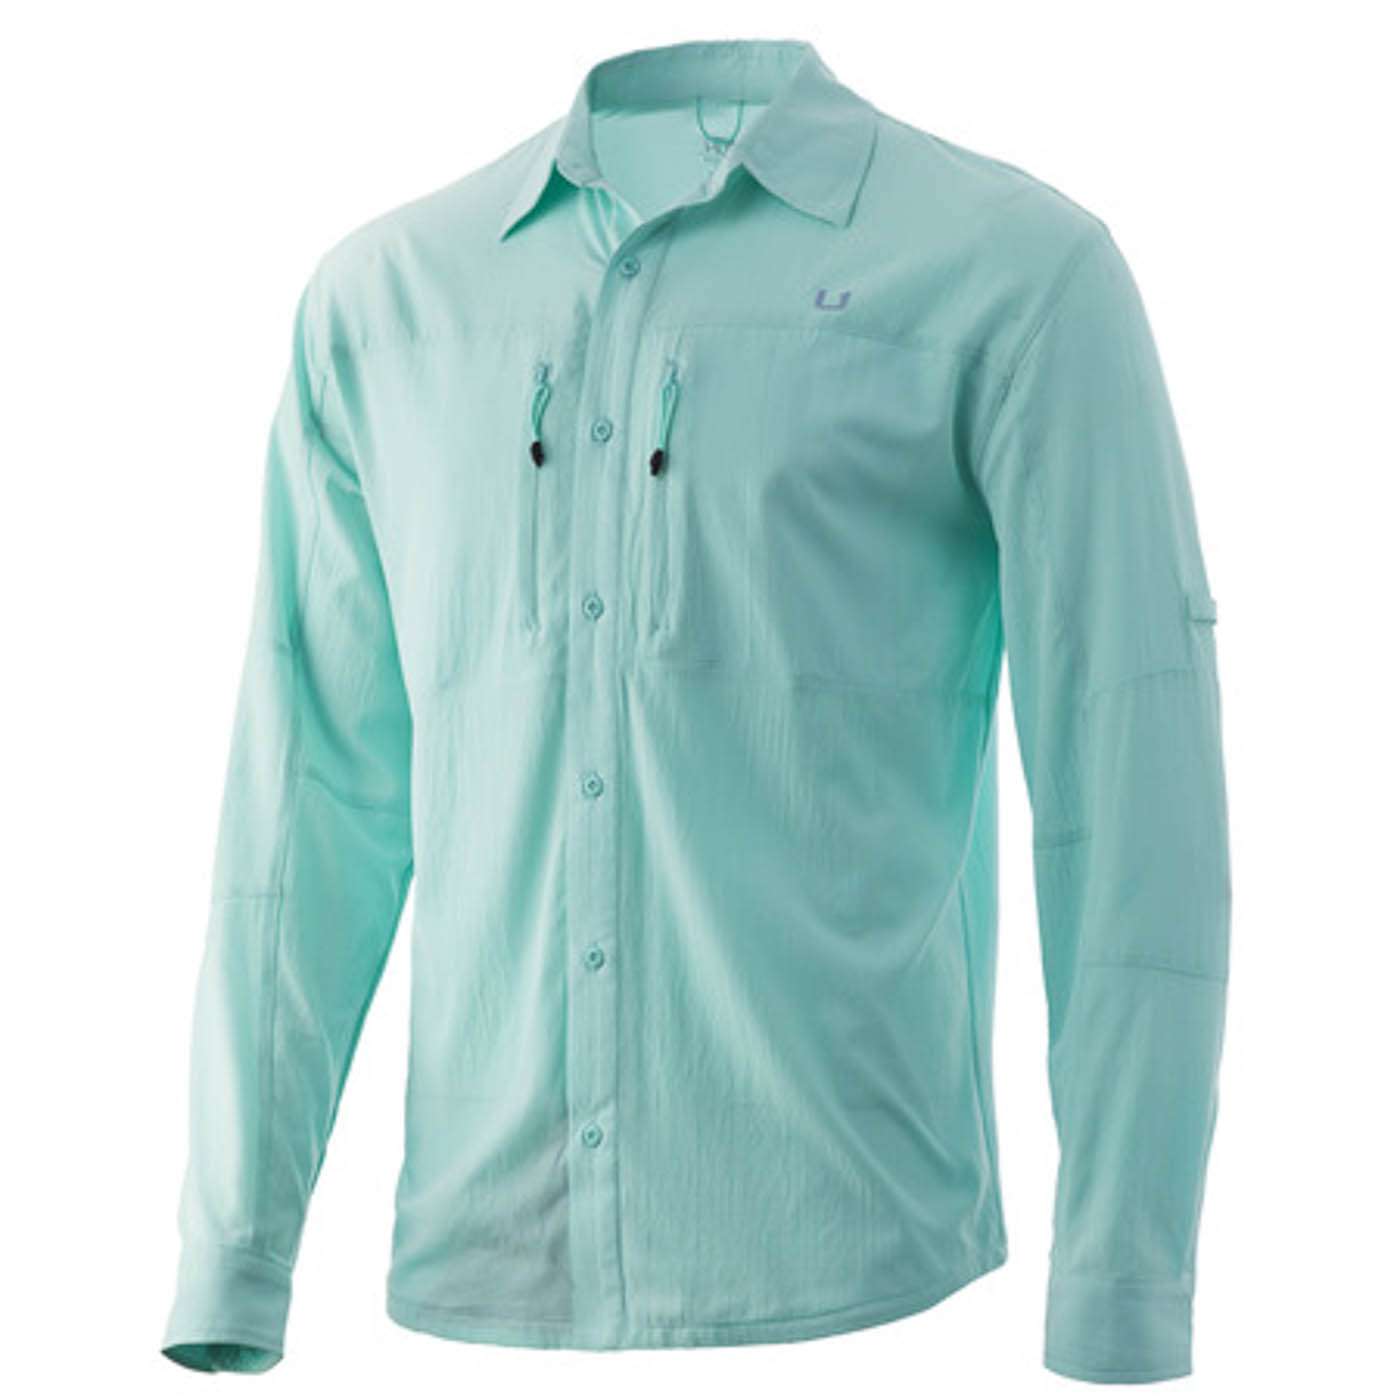 <p><strong>Huk A1A Woven Shirt</strong></p><p>The A1A provides ultimate breathability inspired by the open road along Floridaâs coast, and the endless possibilities that come with it. The shirt features all over perforation, cooling fibers, 4-way stretch for mobility, 2 zippered chest pockets, and an interior eyewear wipe. The anti-microbial fabric has UPF 30+ rating to provide UV protection against the sun. $70. <a href=